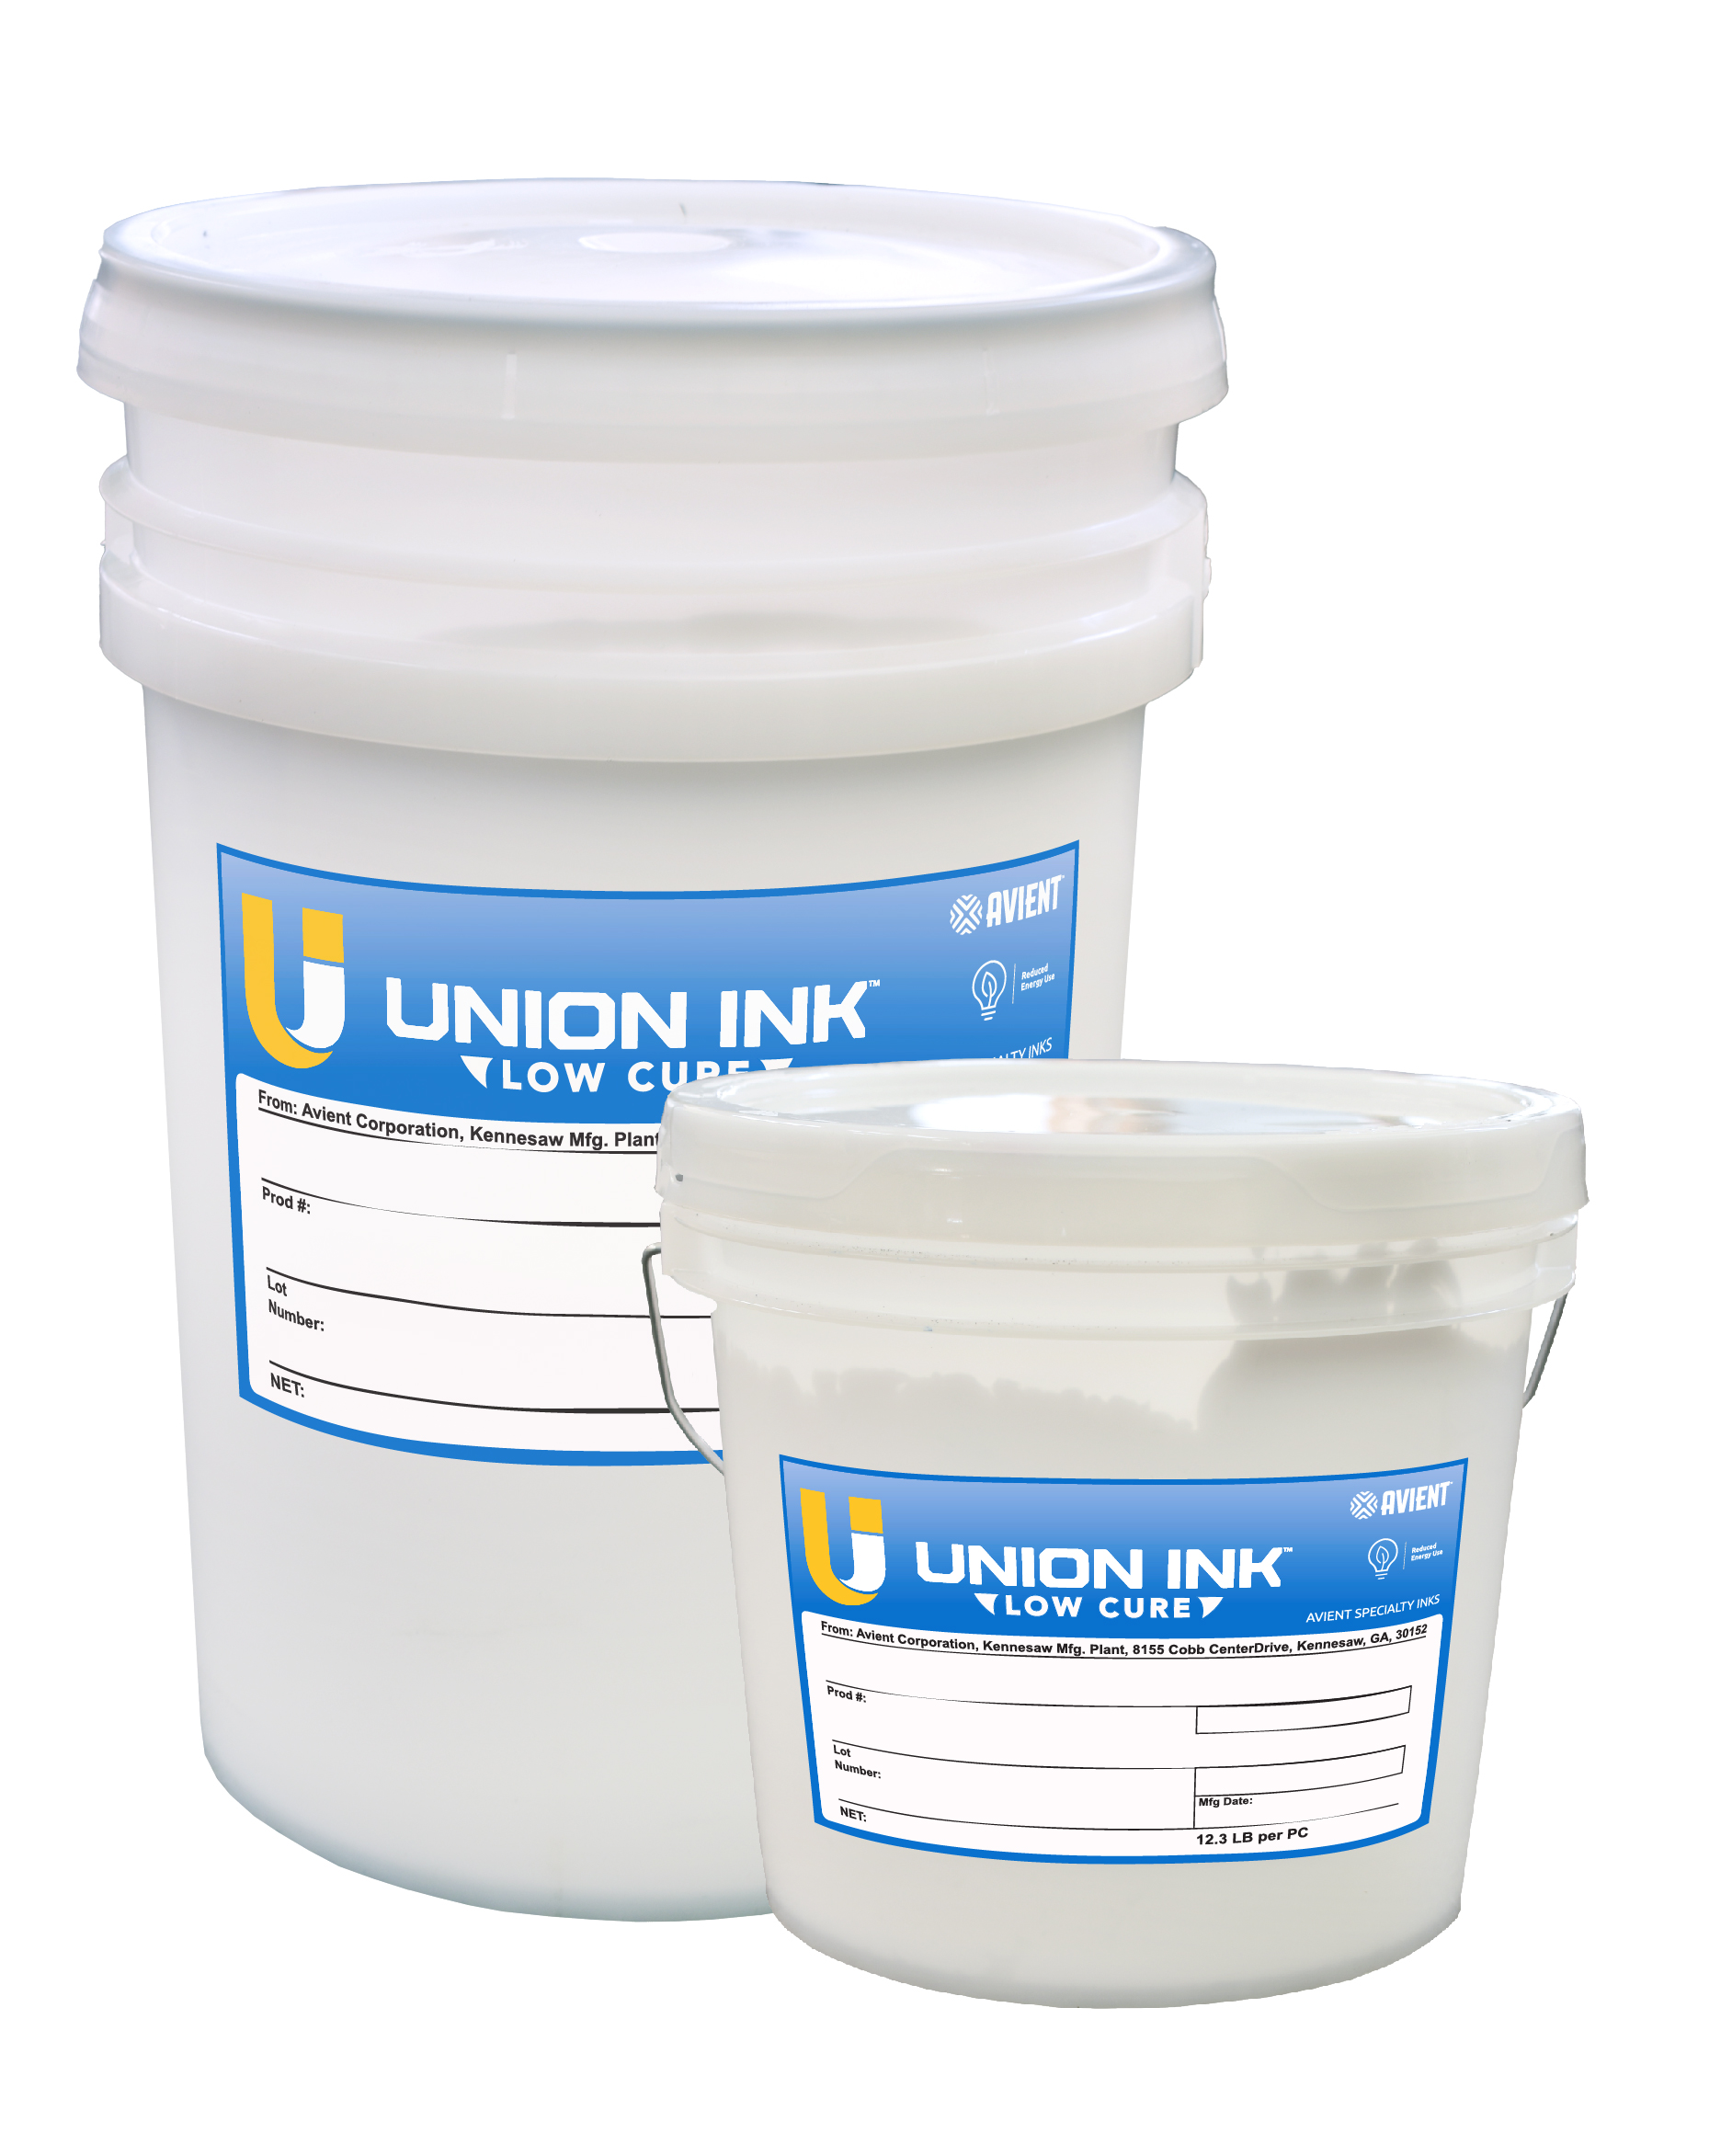 Union Ink™ Gen2 LC Poly White is a high opacity low bleed low cure white that produces a very soft, matte to low gloss finish with terrific fiber mat-down and great dye blocking ability on a wide range of fabrics.  UPLC1071 Poly White shears down quickly to print like similar low cure products, but retains an even flood and does not "puff' as much as competitive products resulting in excellent printability and detail.